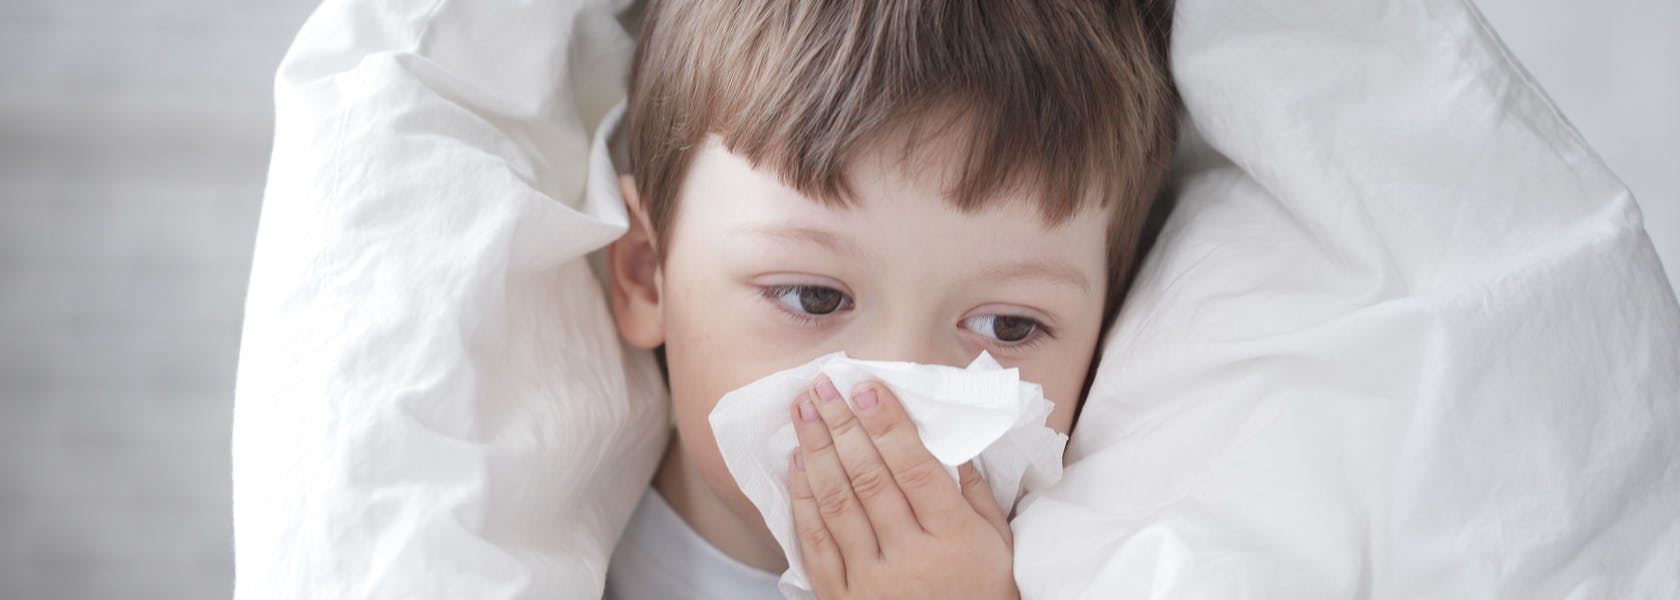 Child with flu blowing his nose